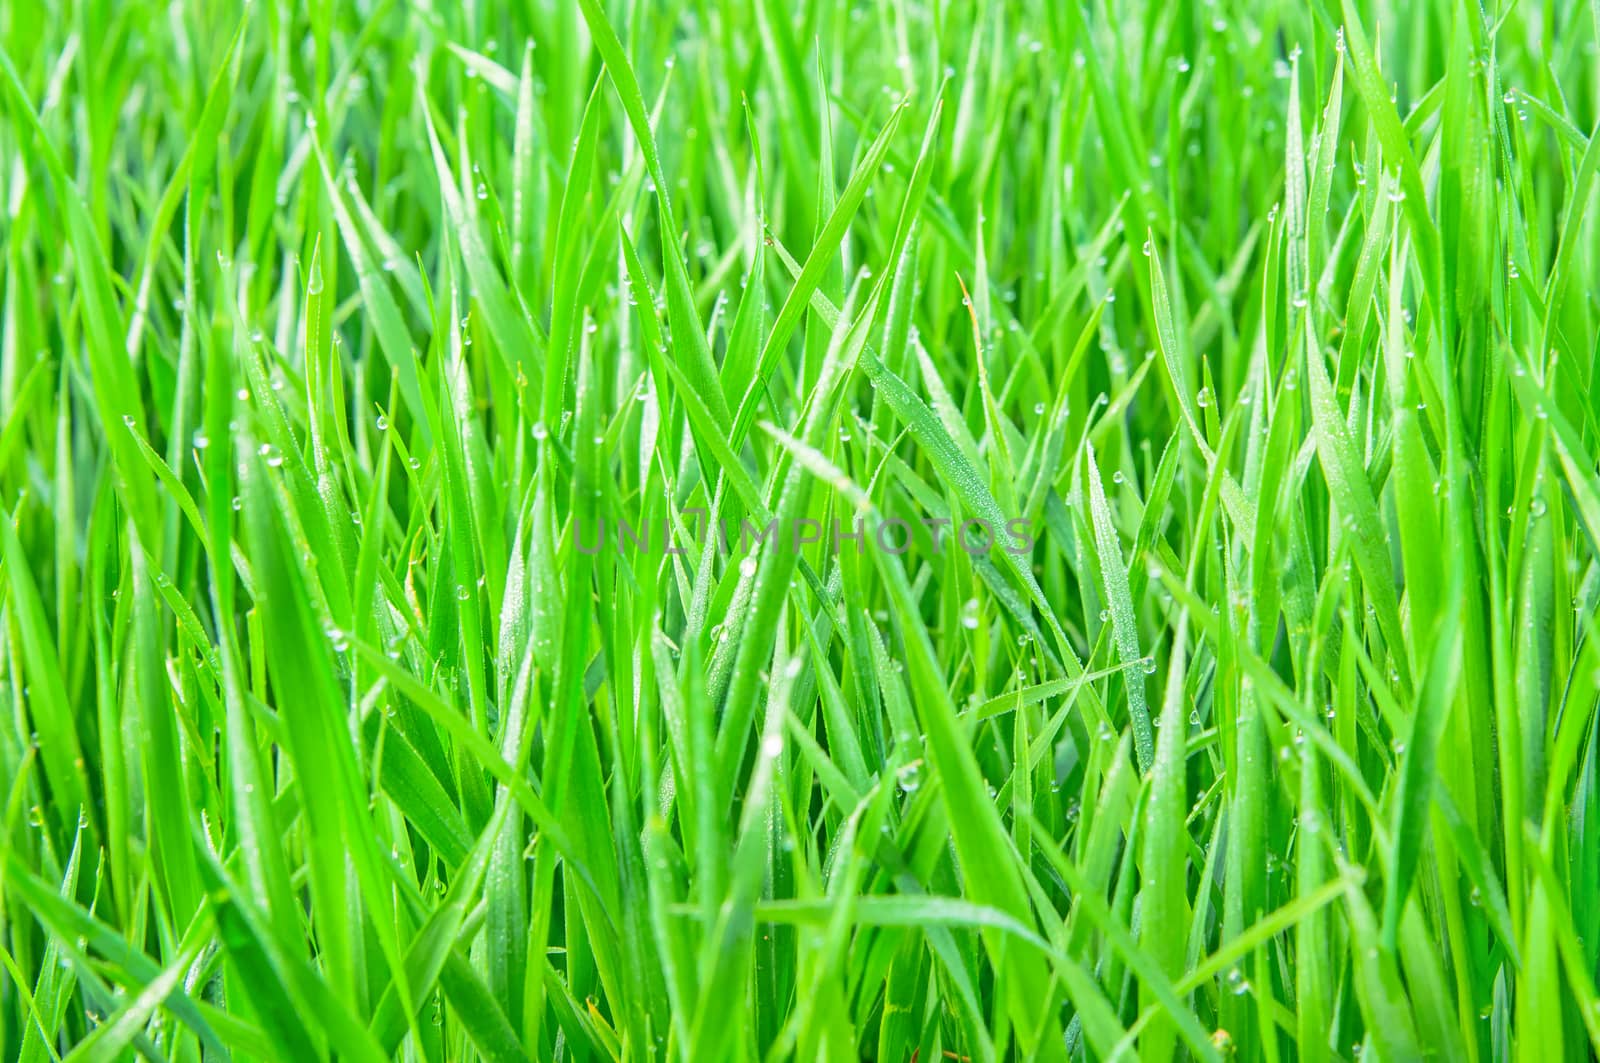 Fresh green grass with water droplet